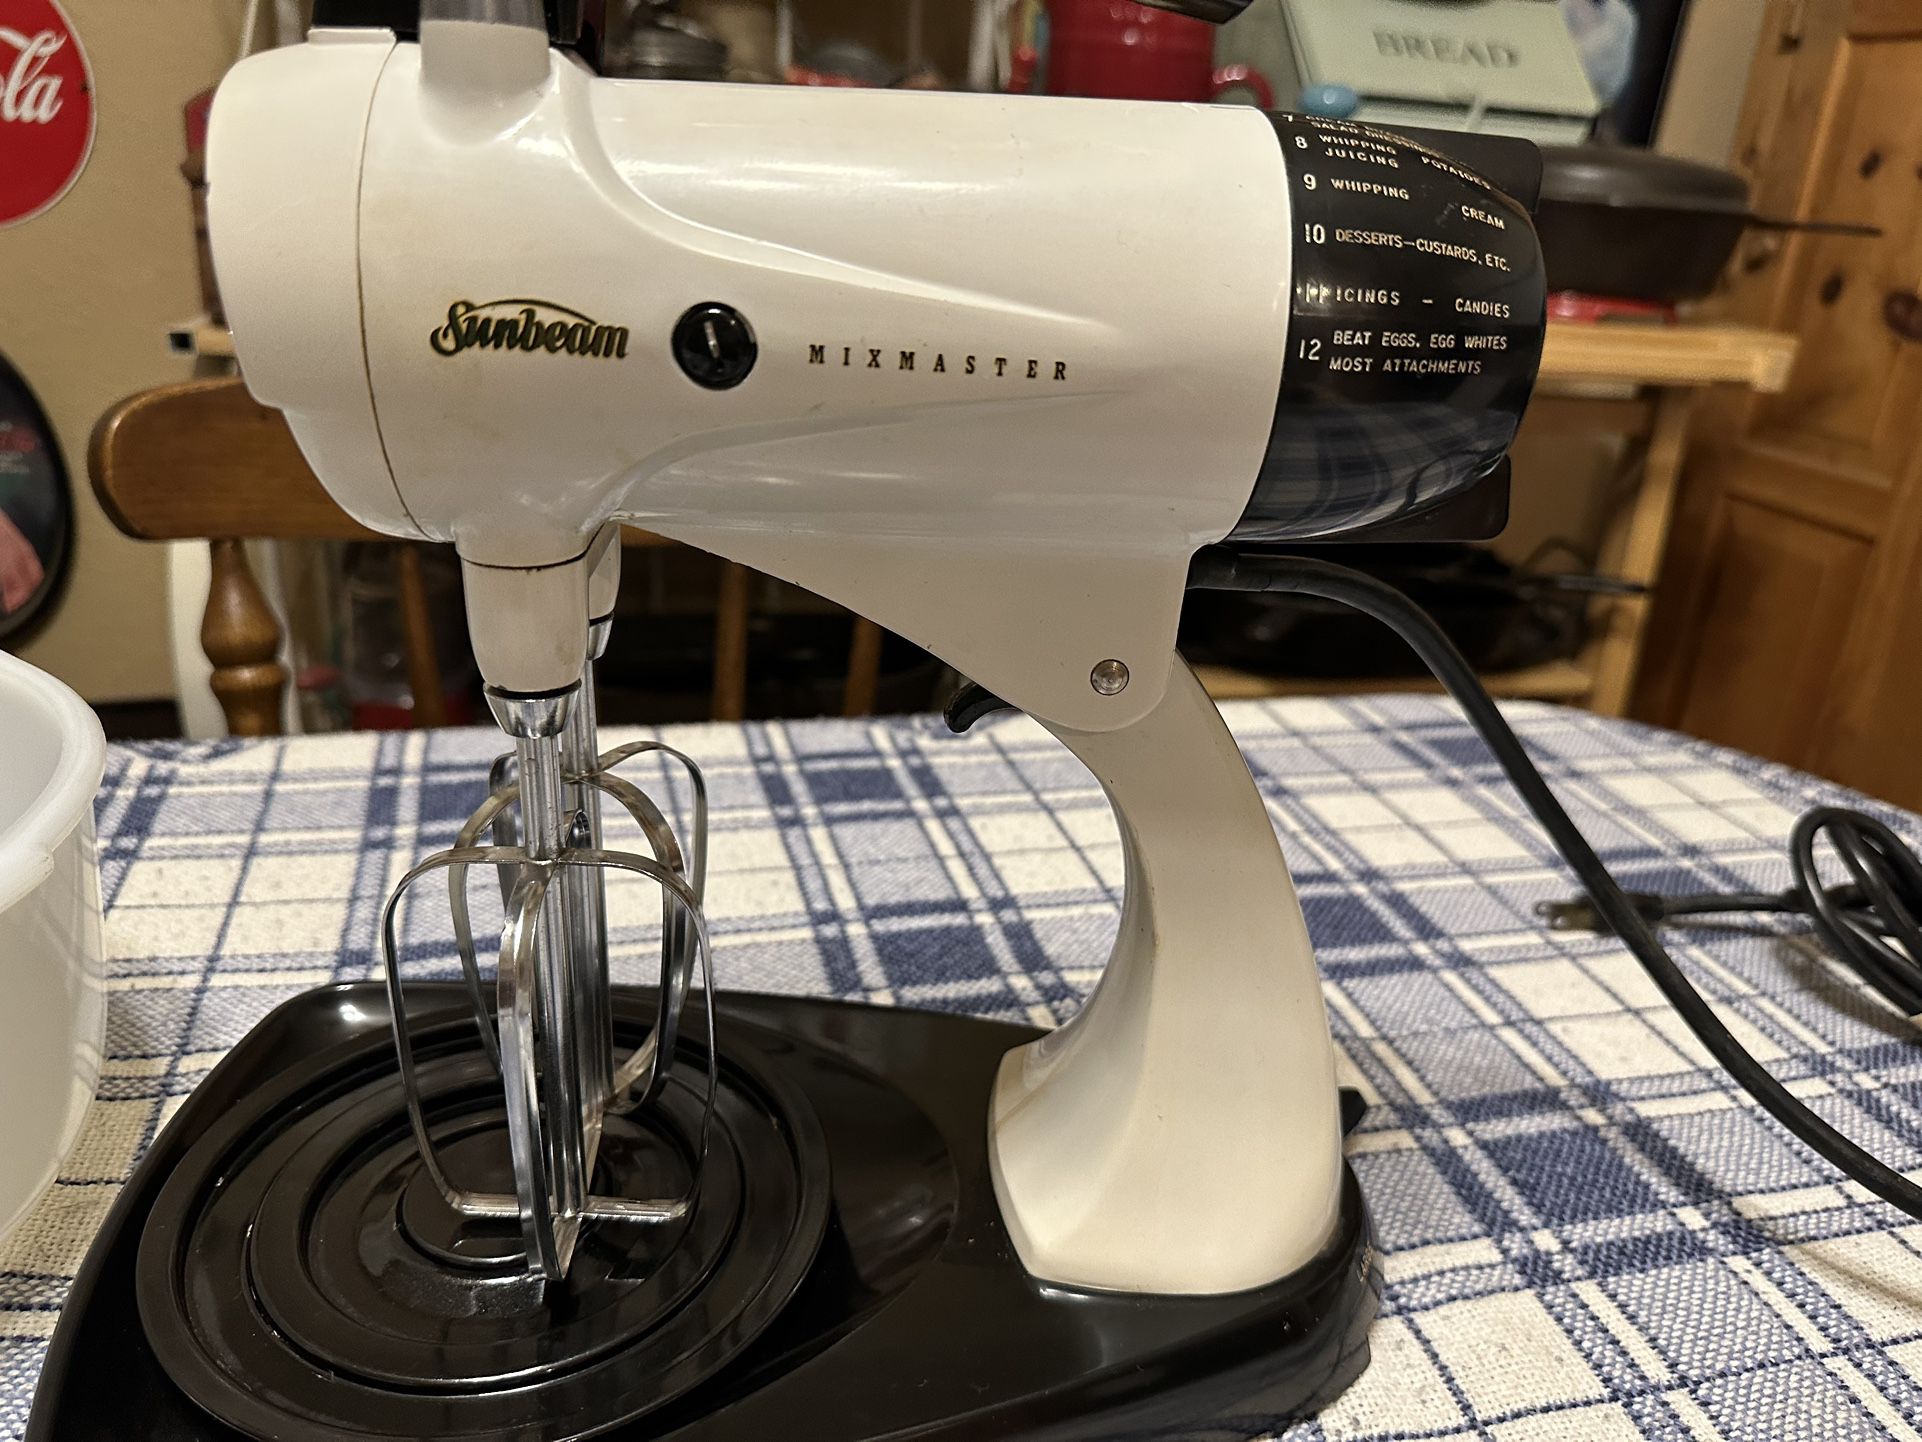 1960s Vintage Sunbeam Mixmaster Vista Stand Mixer Model V-14 w/ Glasbake  Bowls and Beaters for Sale in Skokie, IL - OfferUp